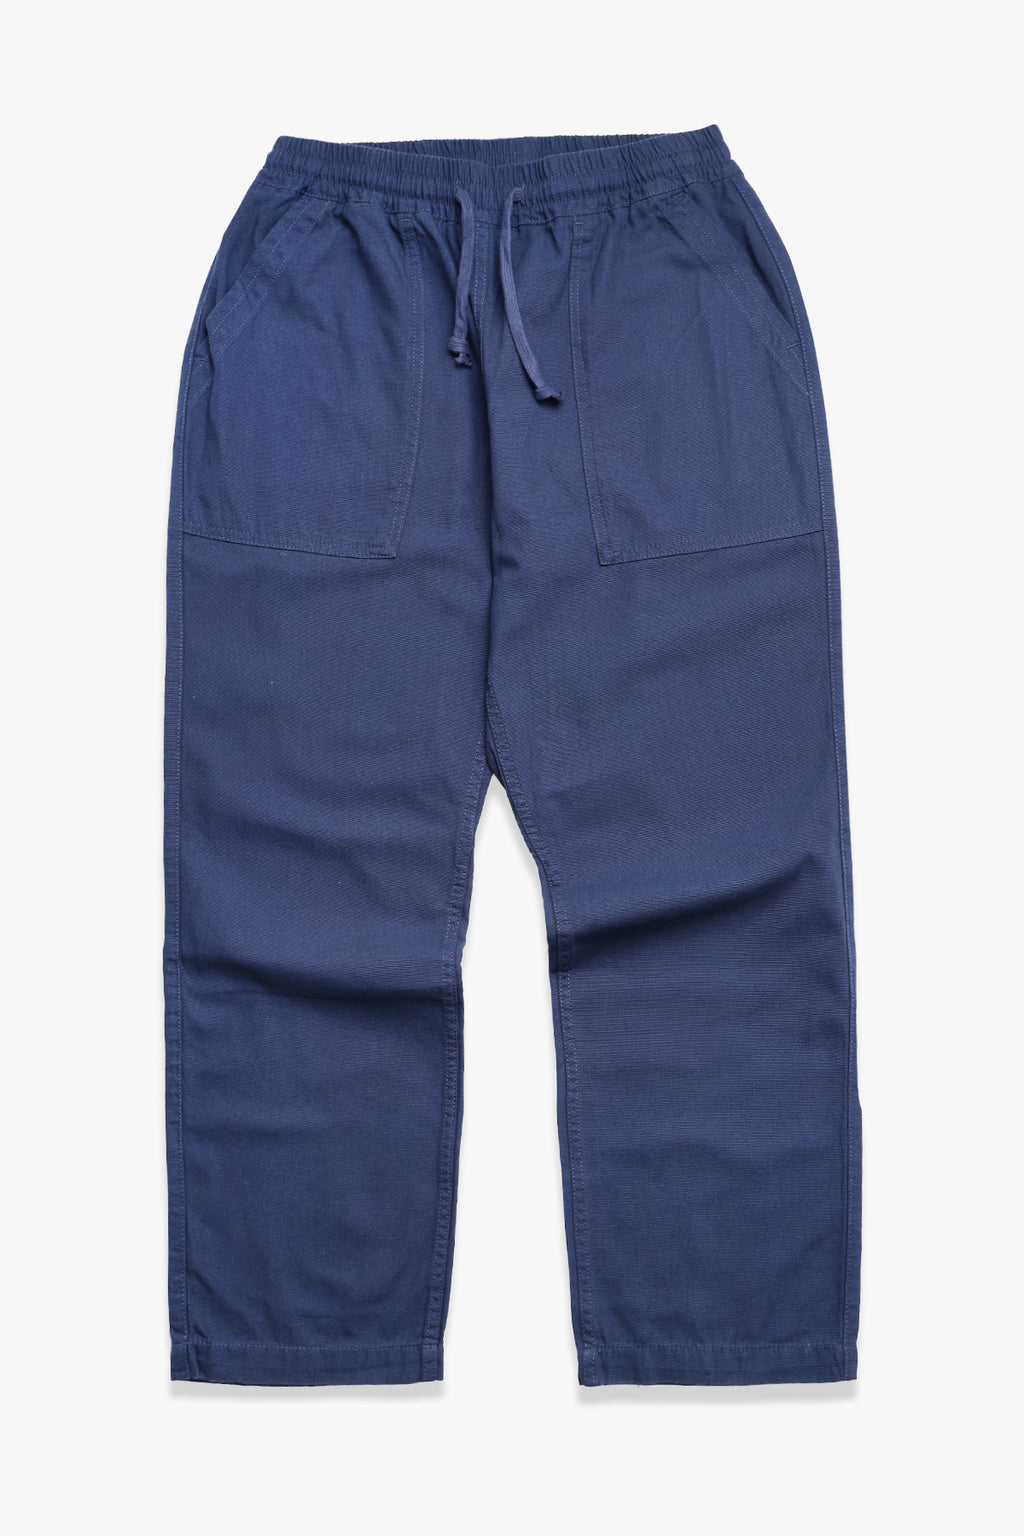 Service Works - Trade Chef Pants - Navy